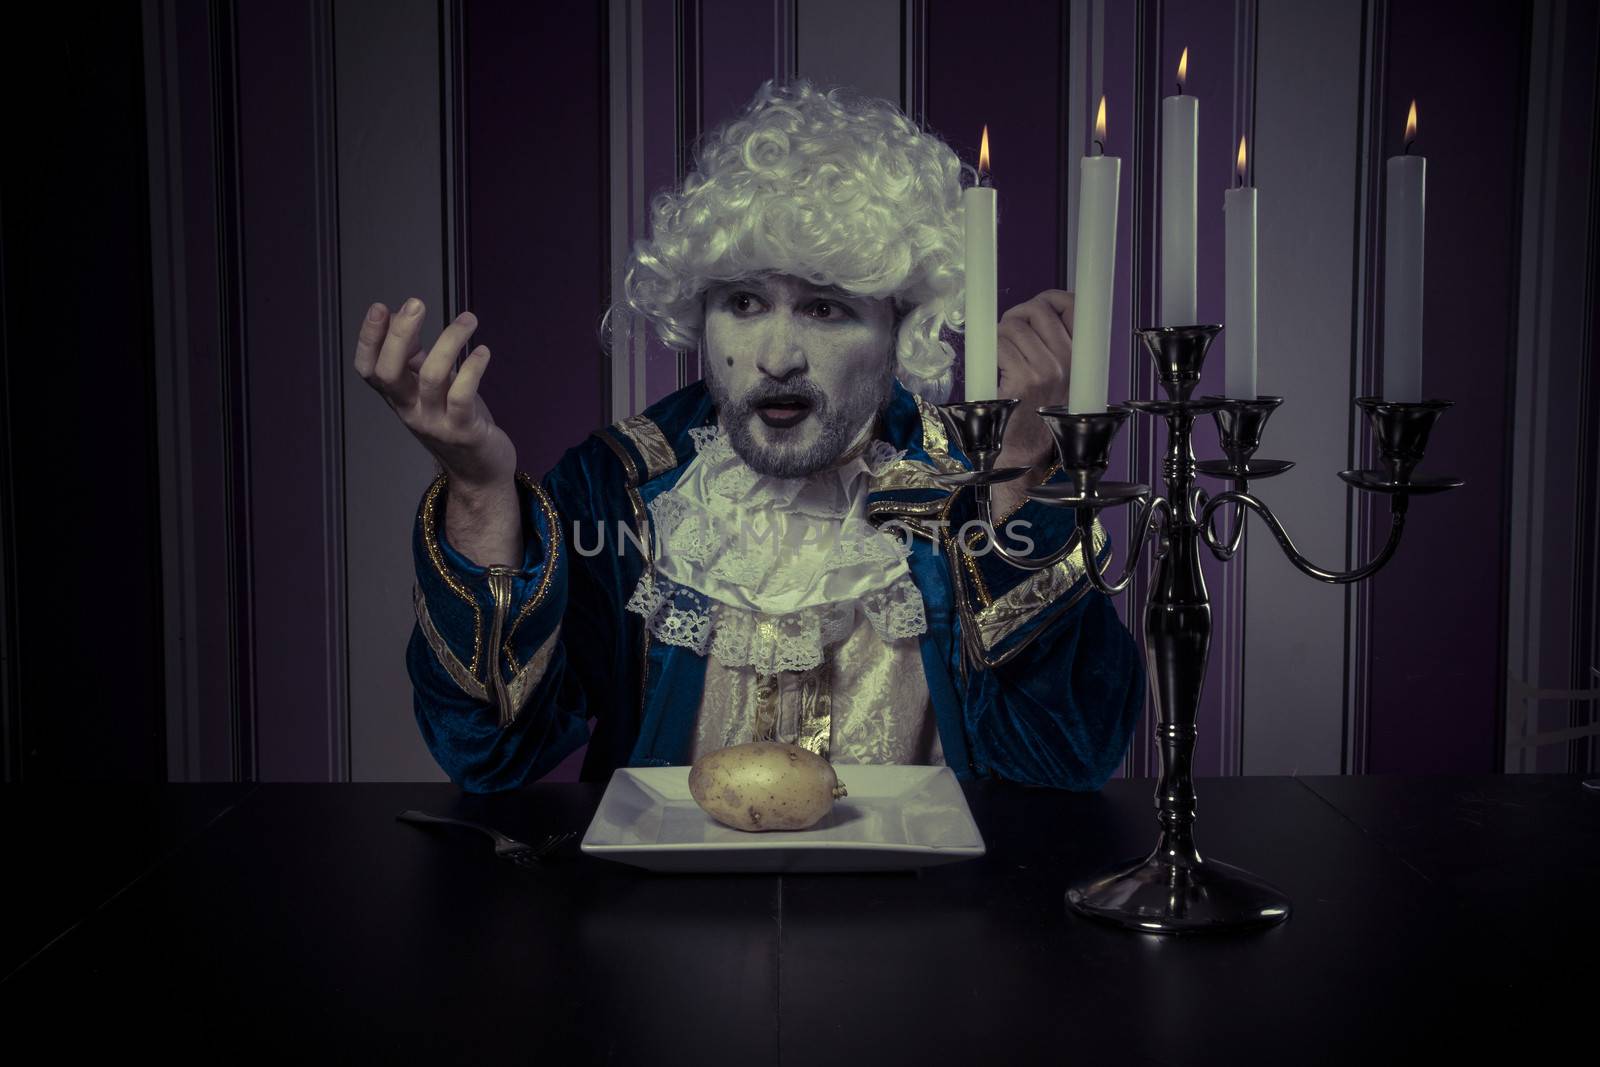 Eating, man dressed in rococo style, concept of wealth and pover by FernandoCortes